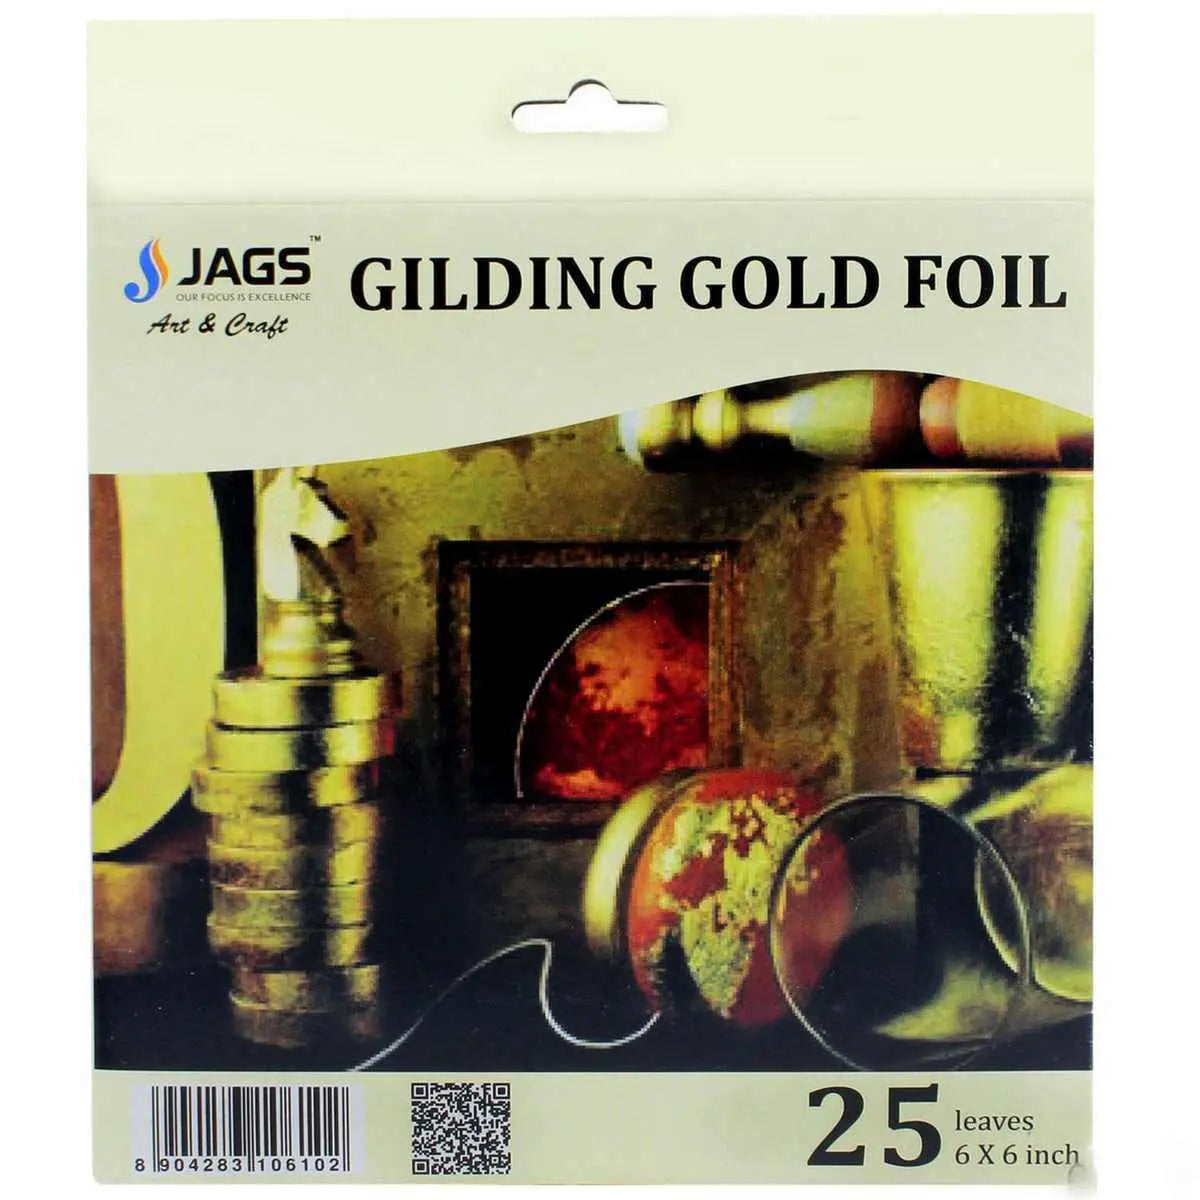 Jags Gilding Gold Foil Paper for Gold Leafing (Pack of 25 Sheets) (6x6 Inch) Jags